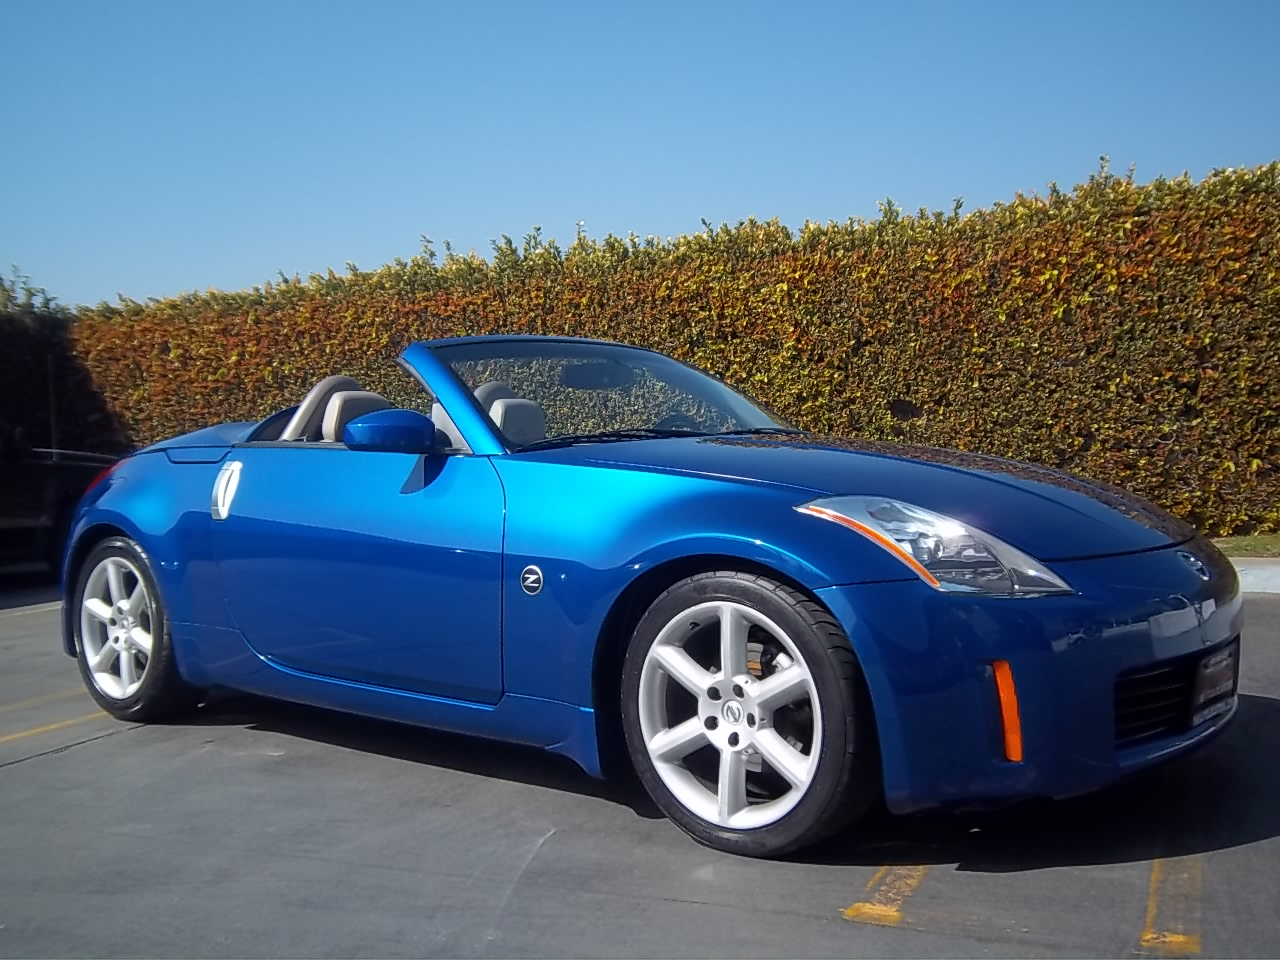 2004 Nissan 350z enthusiast roadster #8